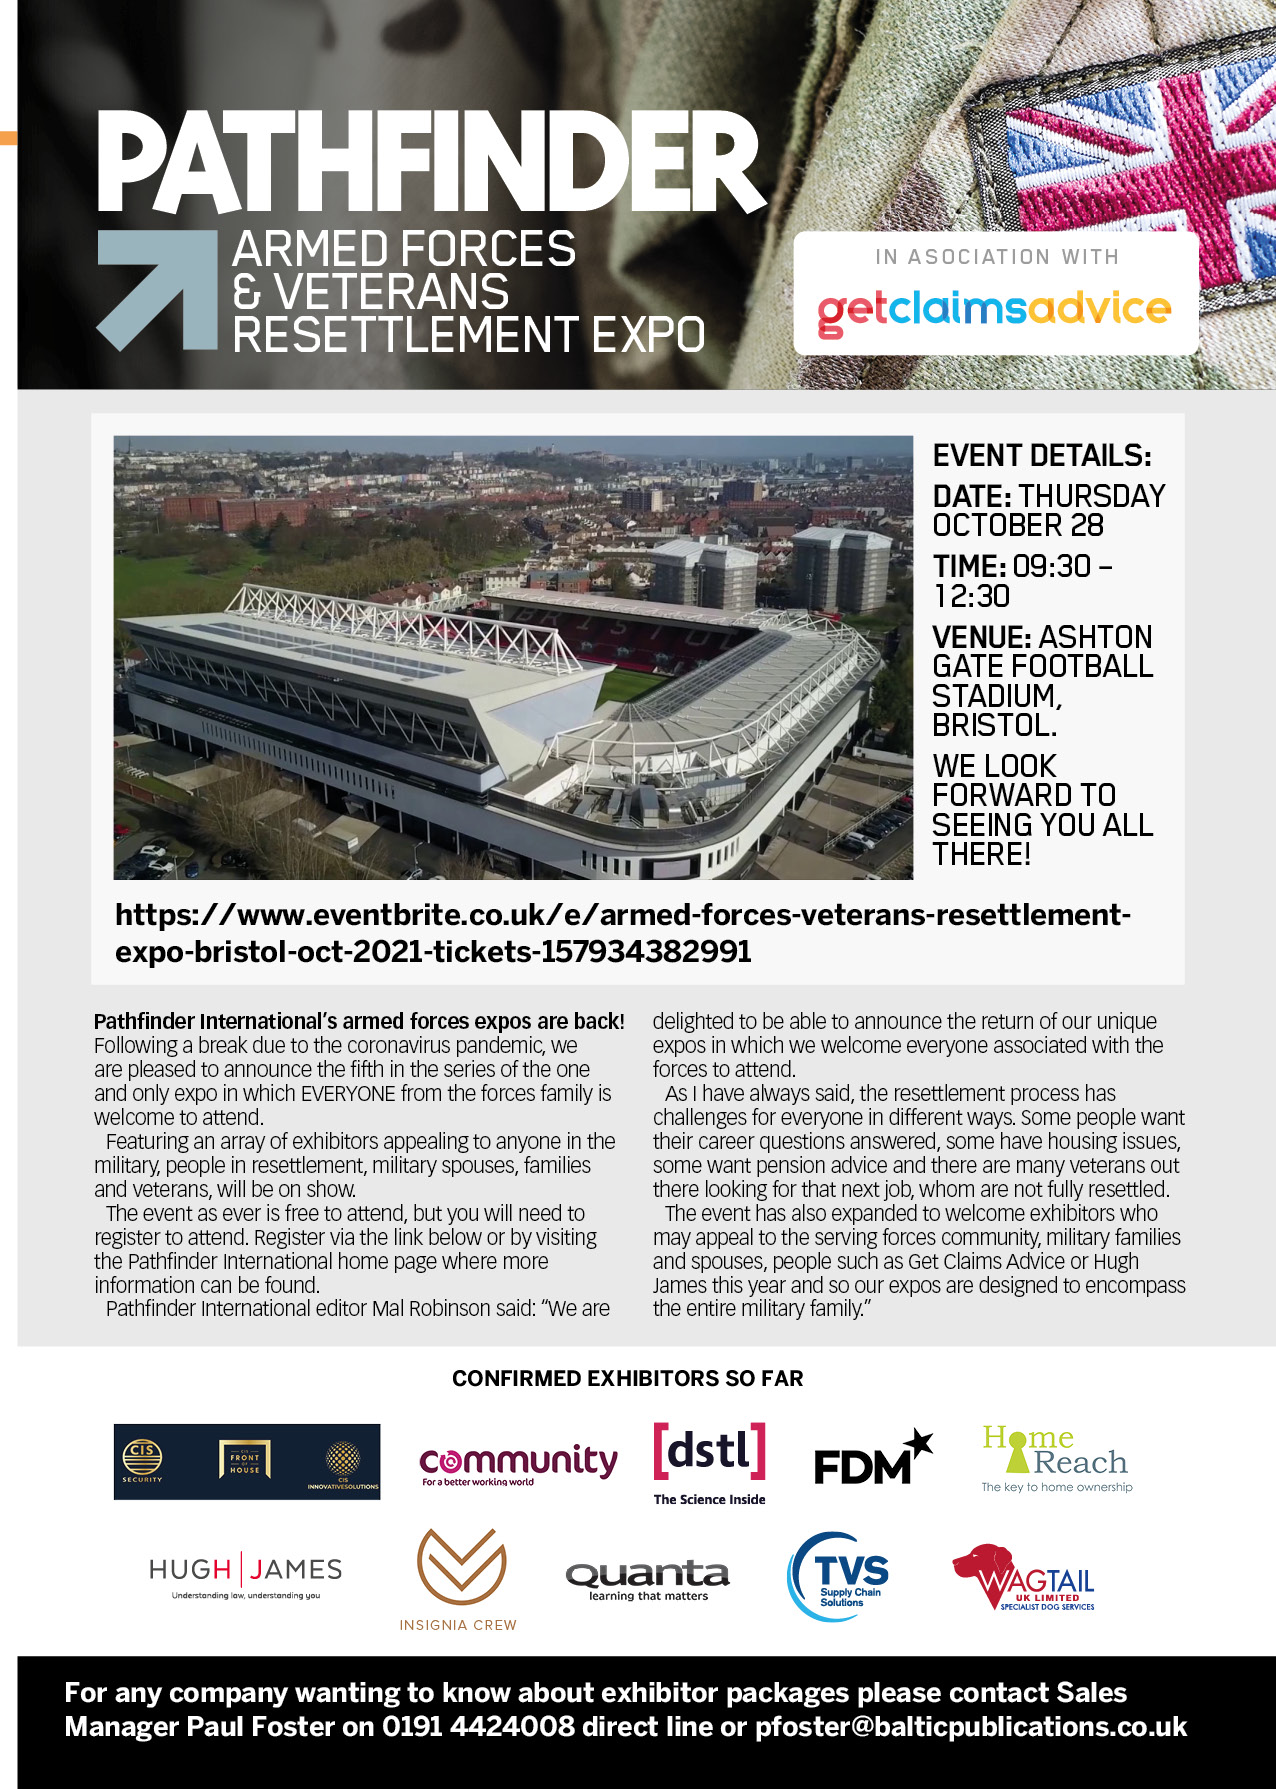 The Armed Forces & Veterans Resettlement Expo Bristol – Exhibitor Update